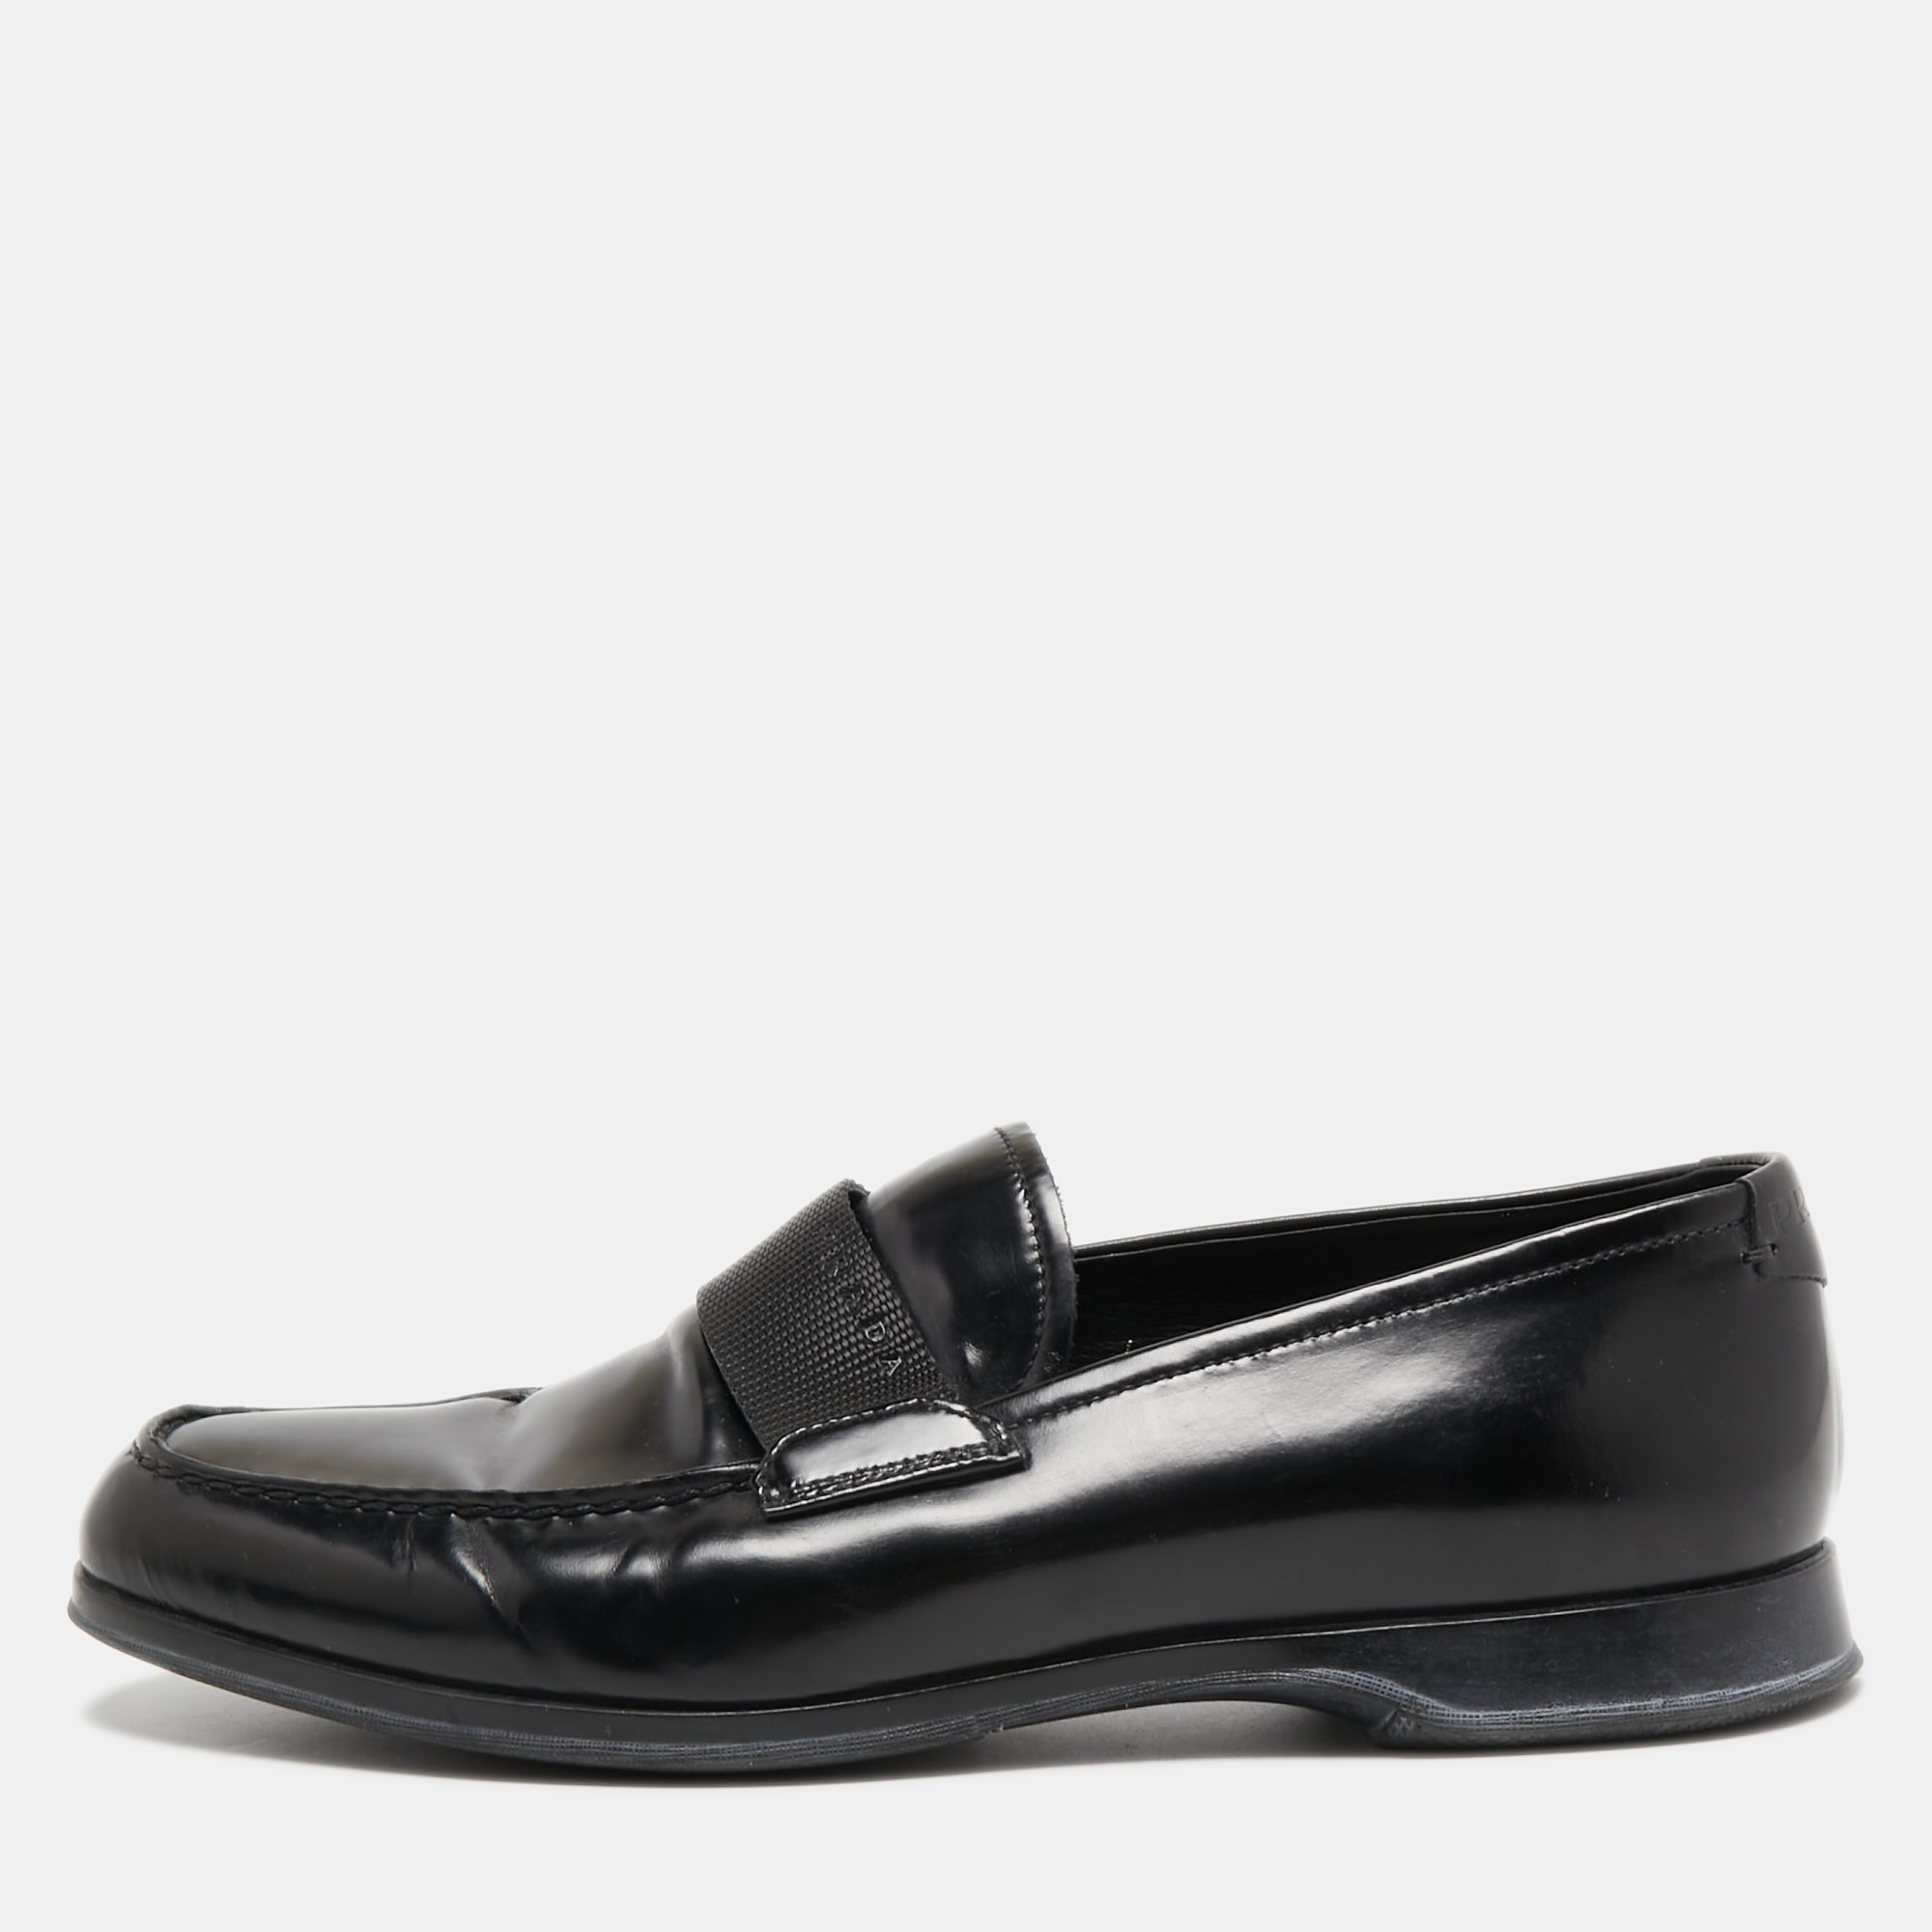 Pre-owned Prada Black Leather Slip On Loafers Size 40.5